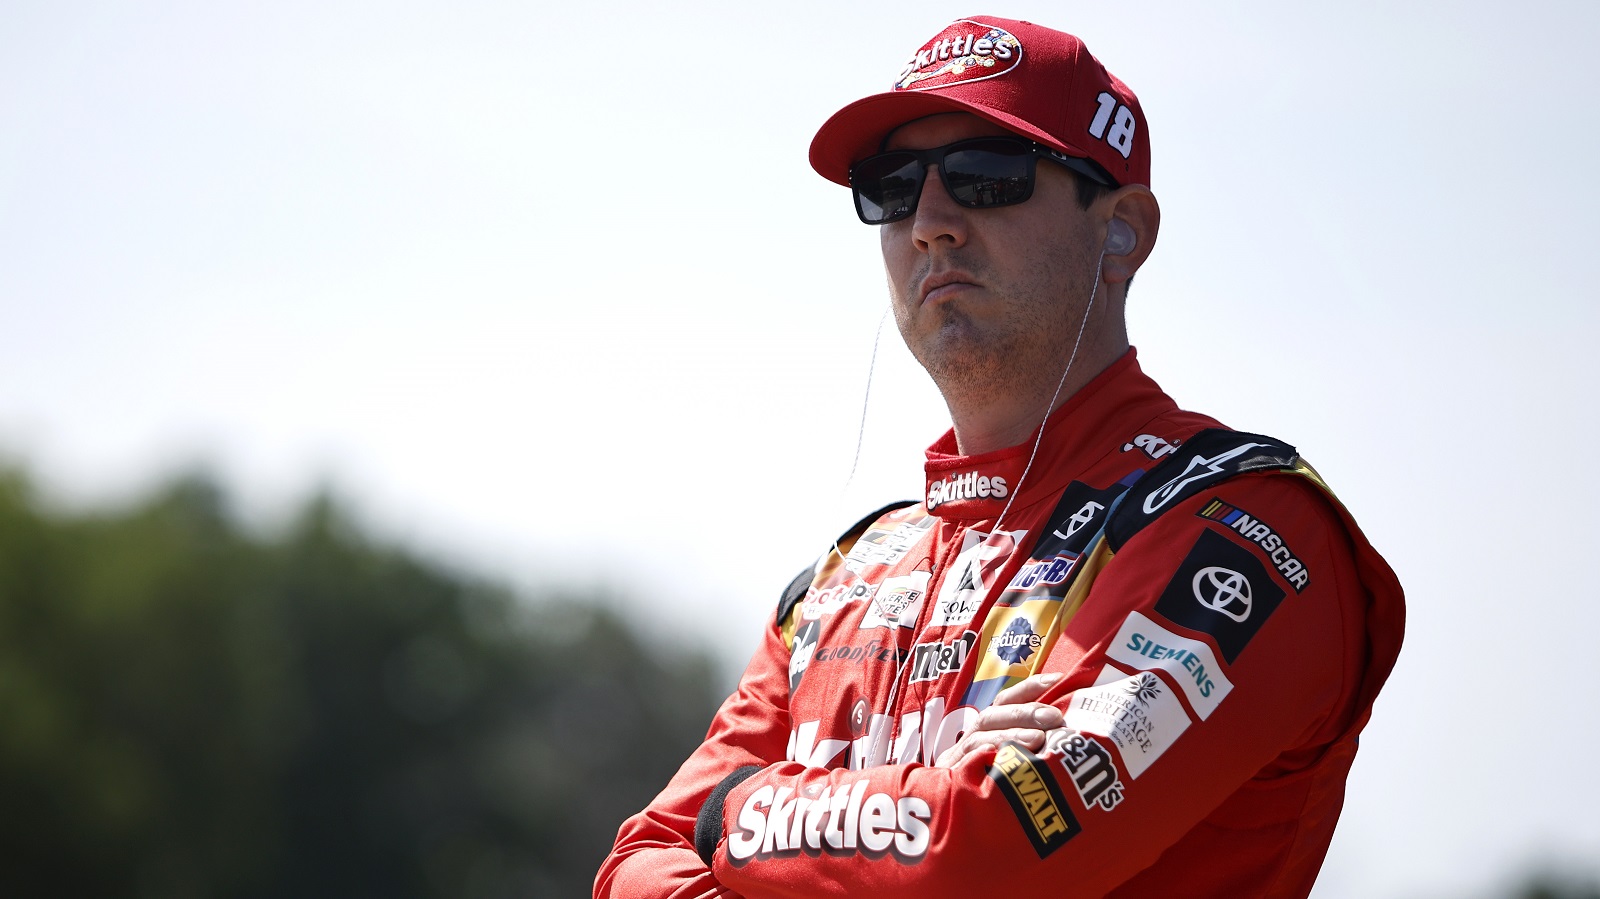 Kyle Busch looks on during practice for the NASCAR Cup Series Kwik Trip 250 at Road America on July 2, 2022 in Elkhart Lake, Wisconsin.